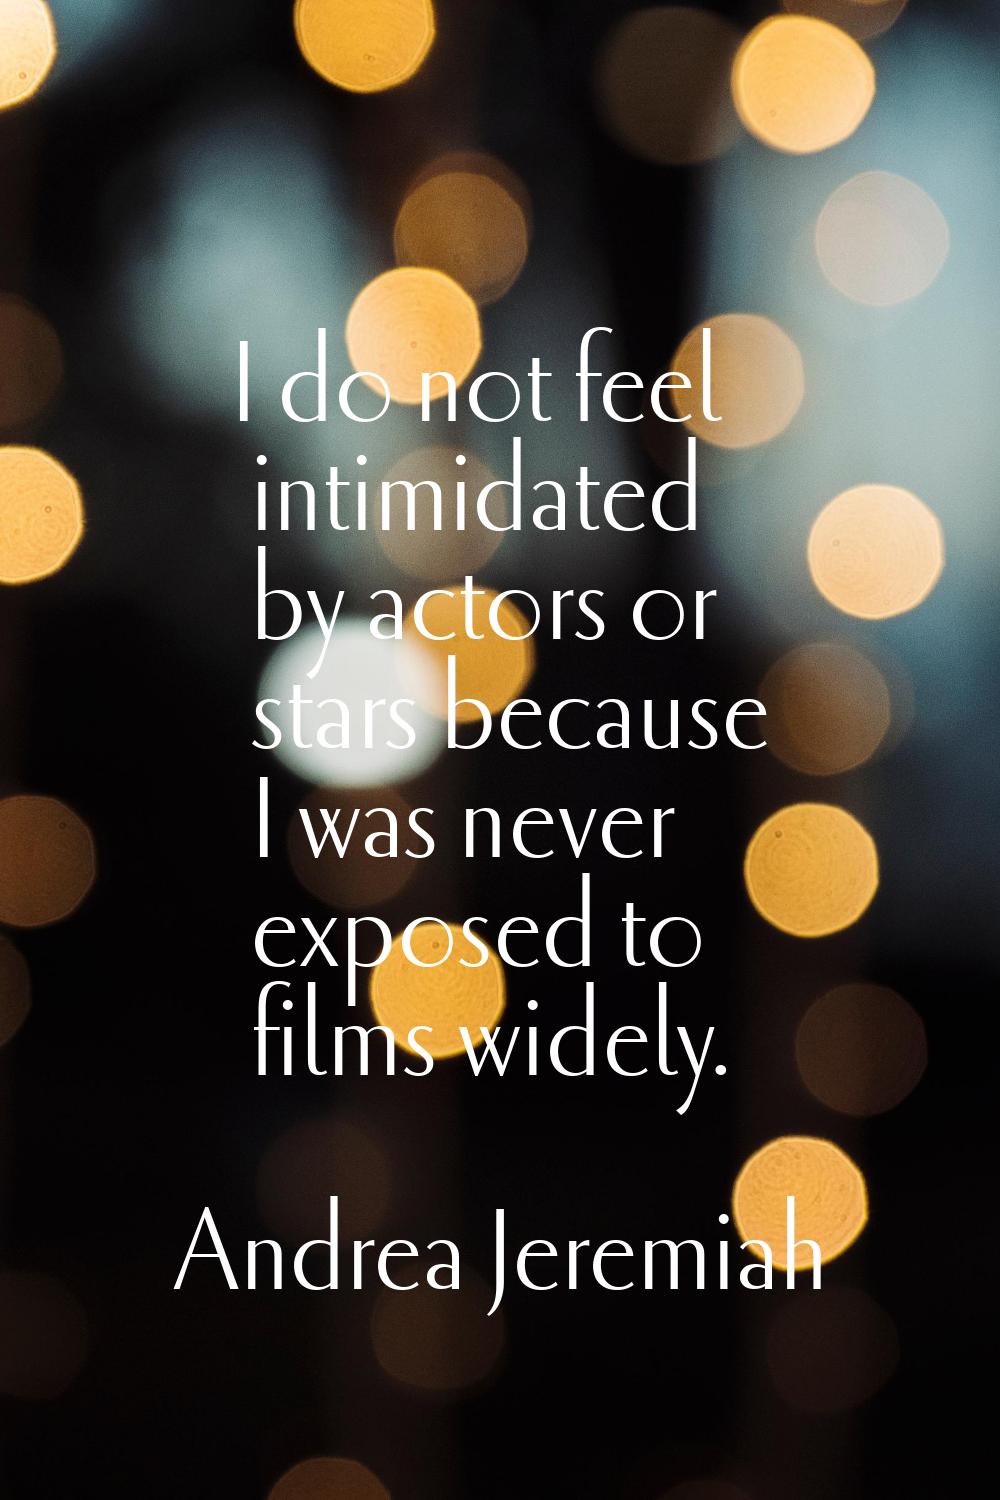 I do not feel intimidated by actors or stars because I was never exposed to films widely.